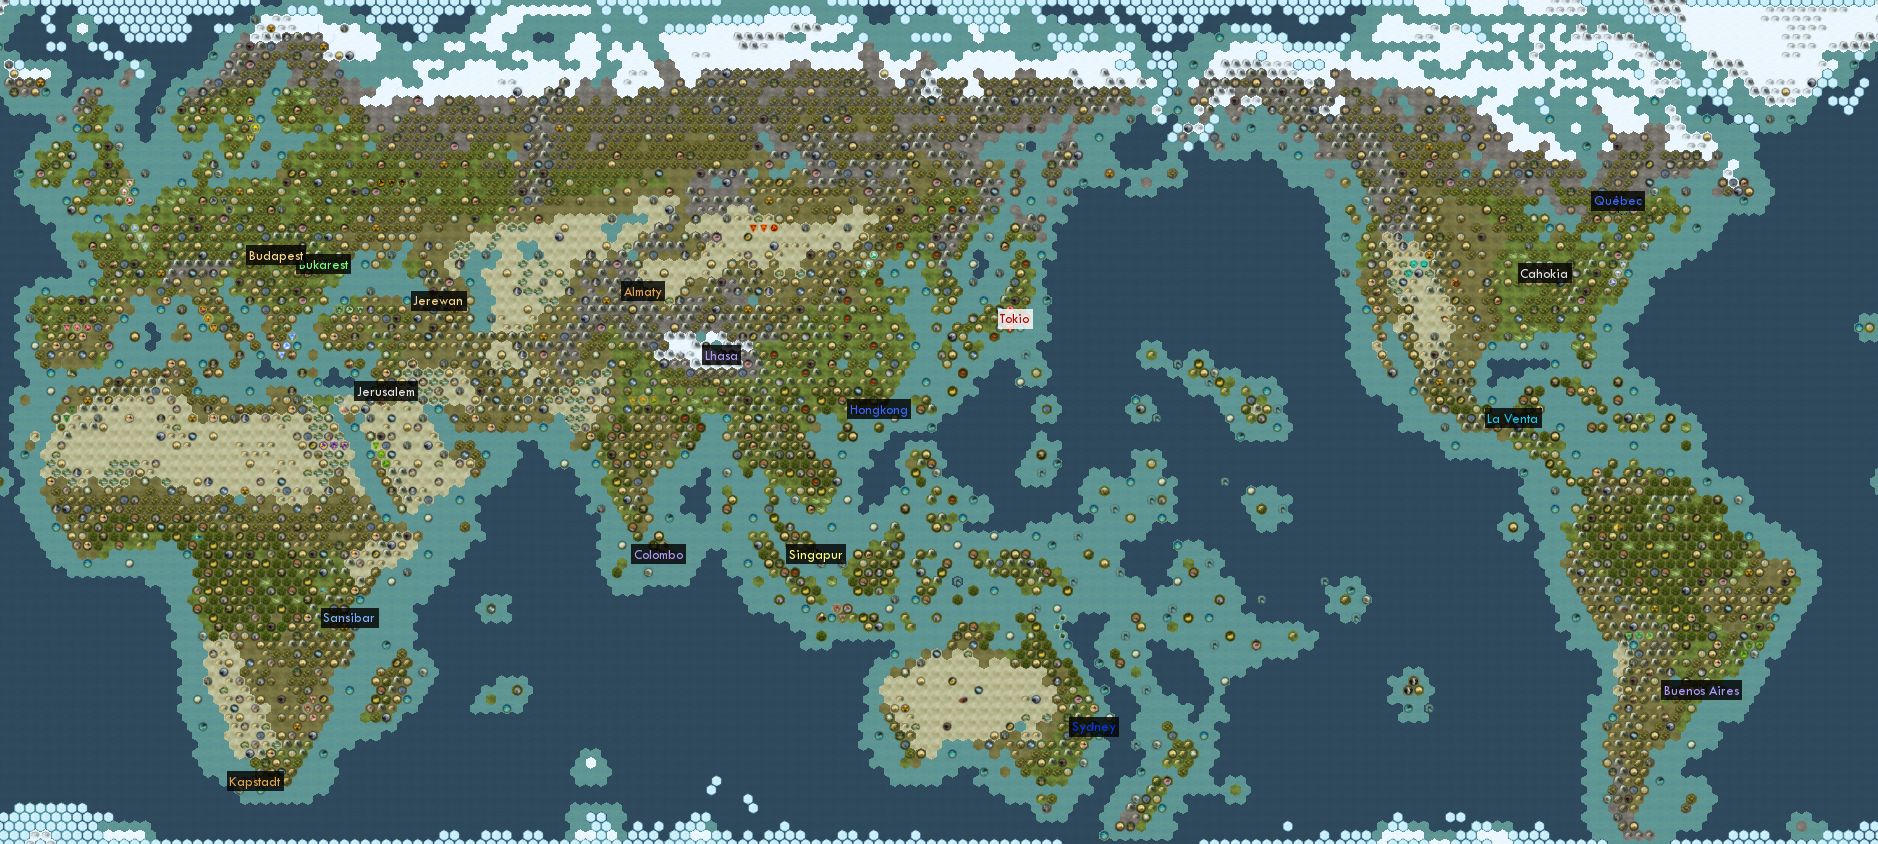 Steam Workshop Play The World Extended Brave New World Edition